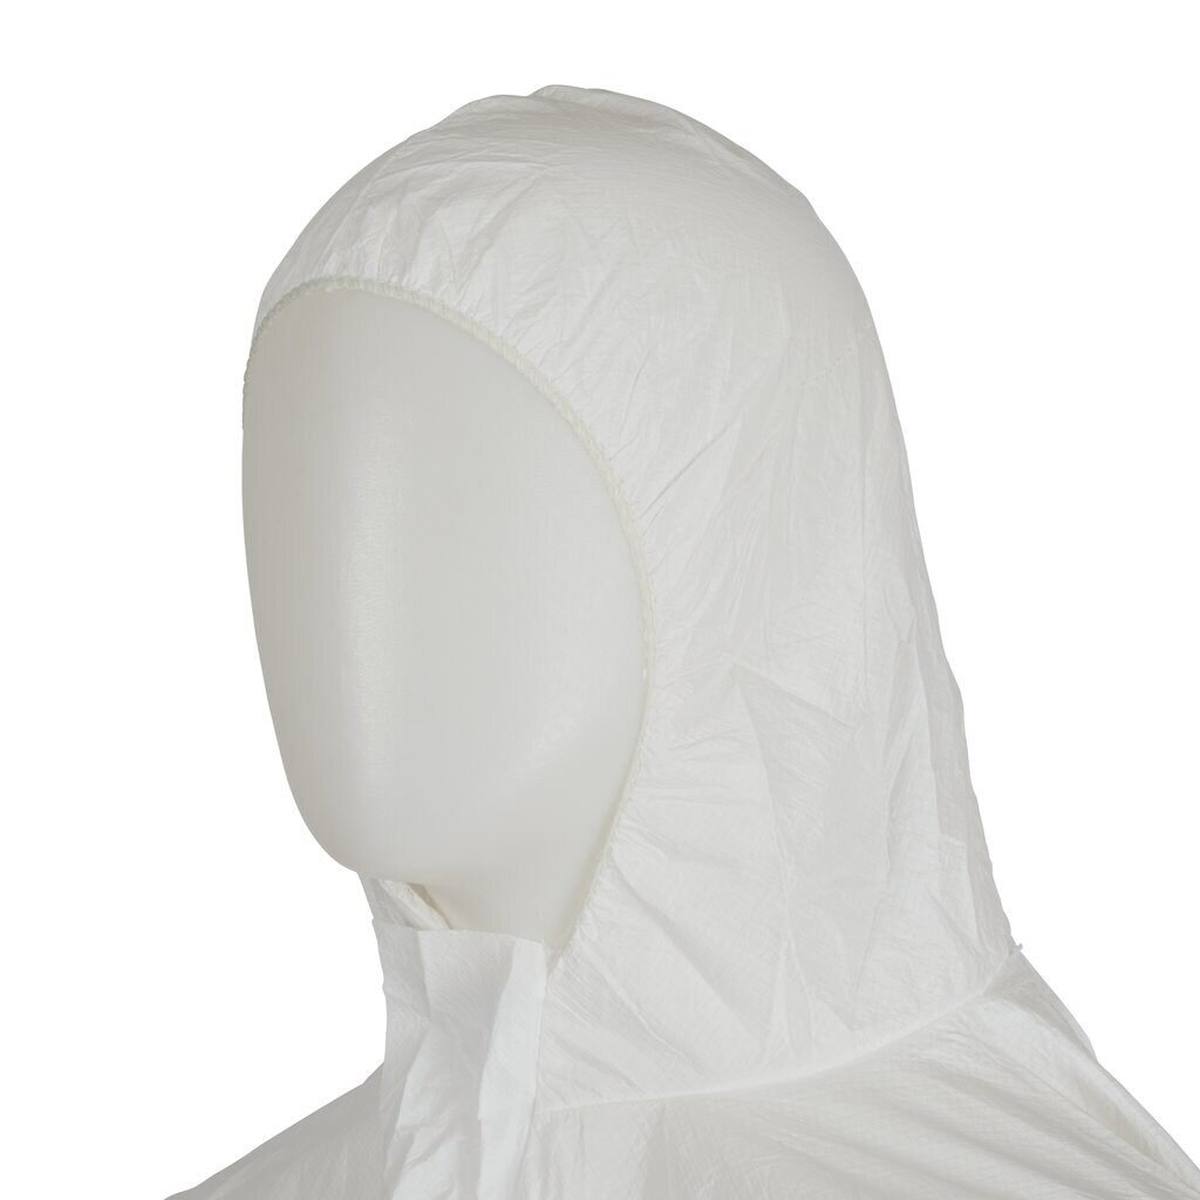 3M 4510 coverall, white, TYPE 5/6, size XL, material microporous PE laminate, elastic band finish